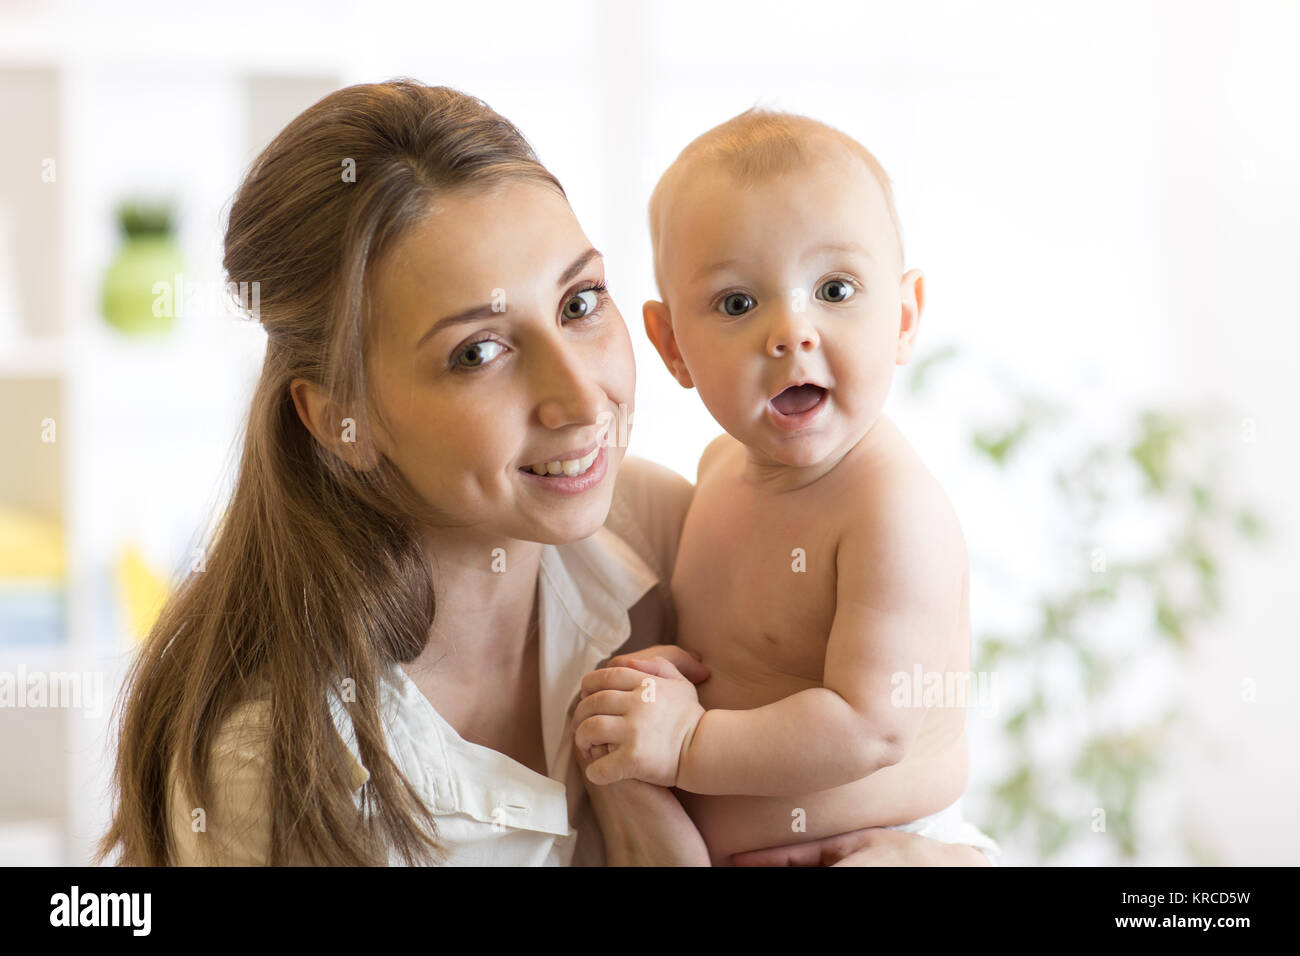 Portrait of happy mother and baby Banque D'Images